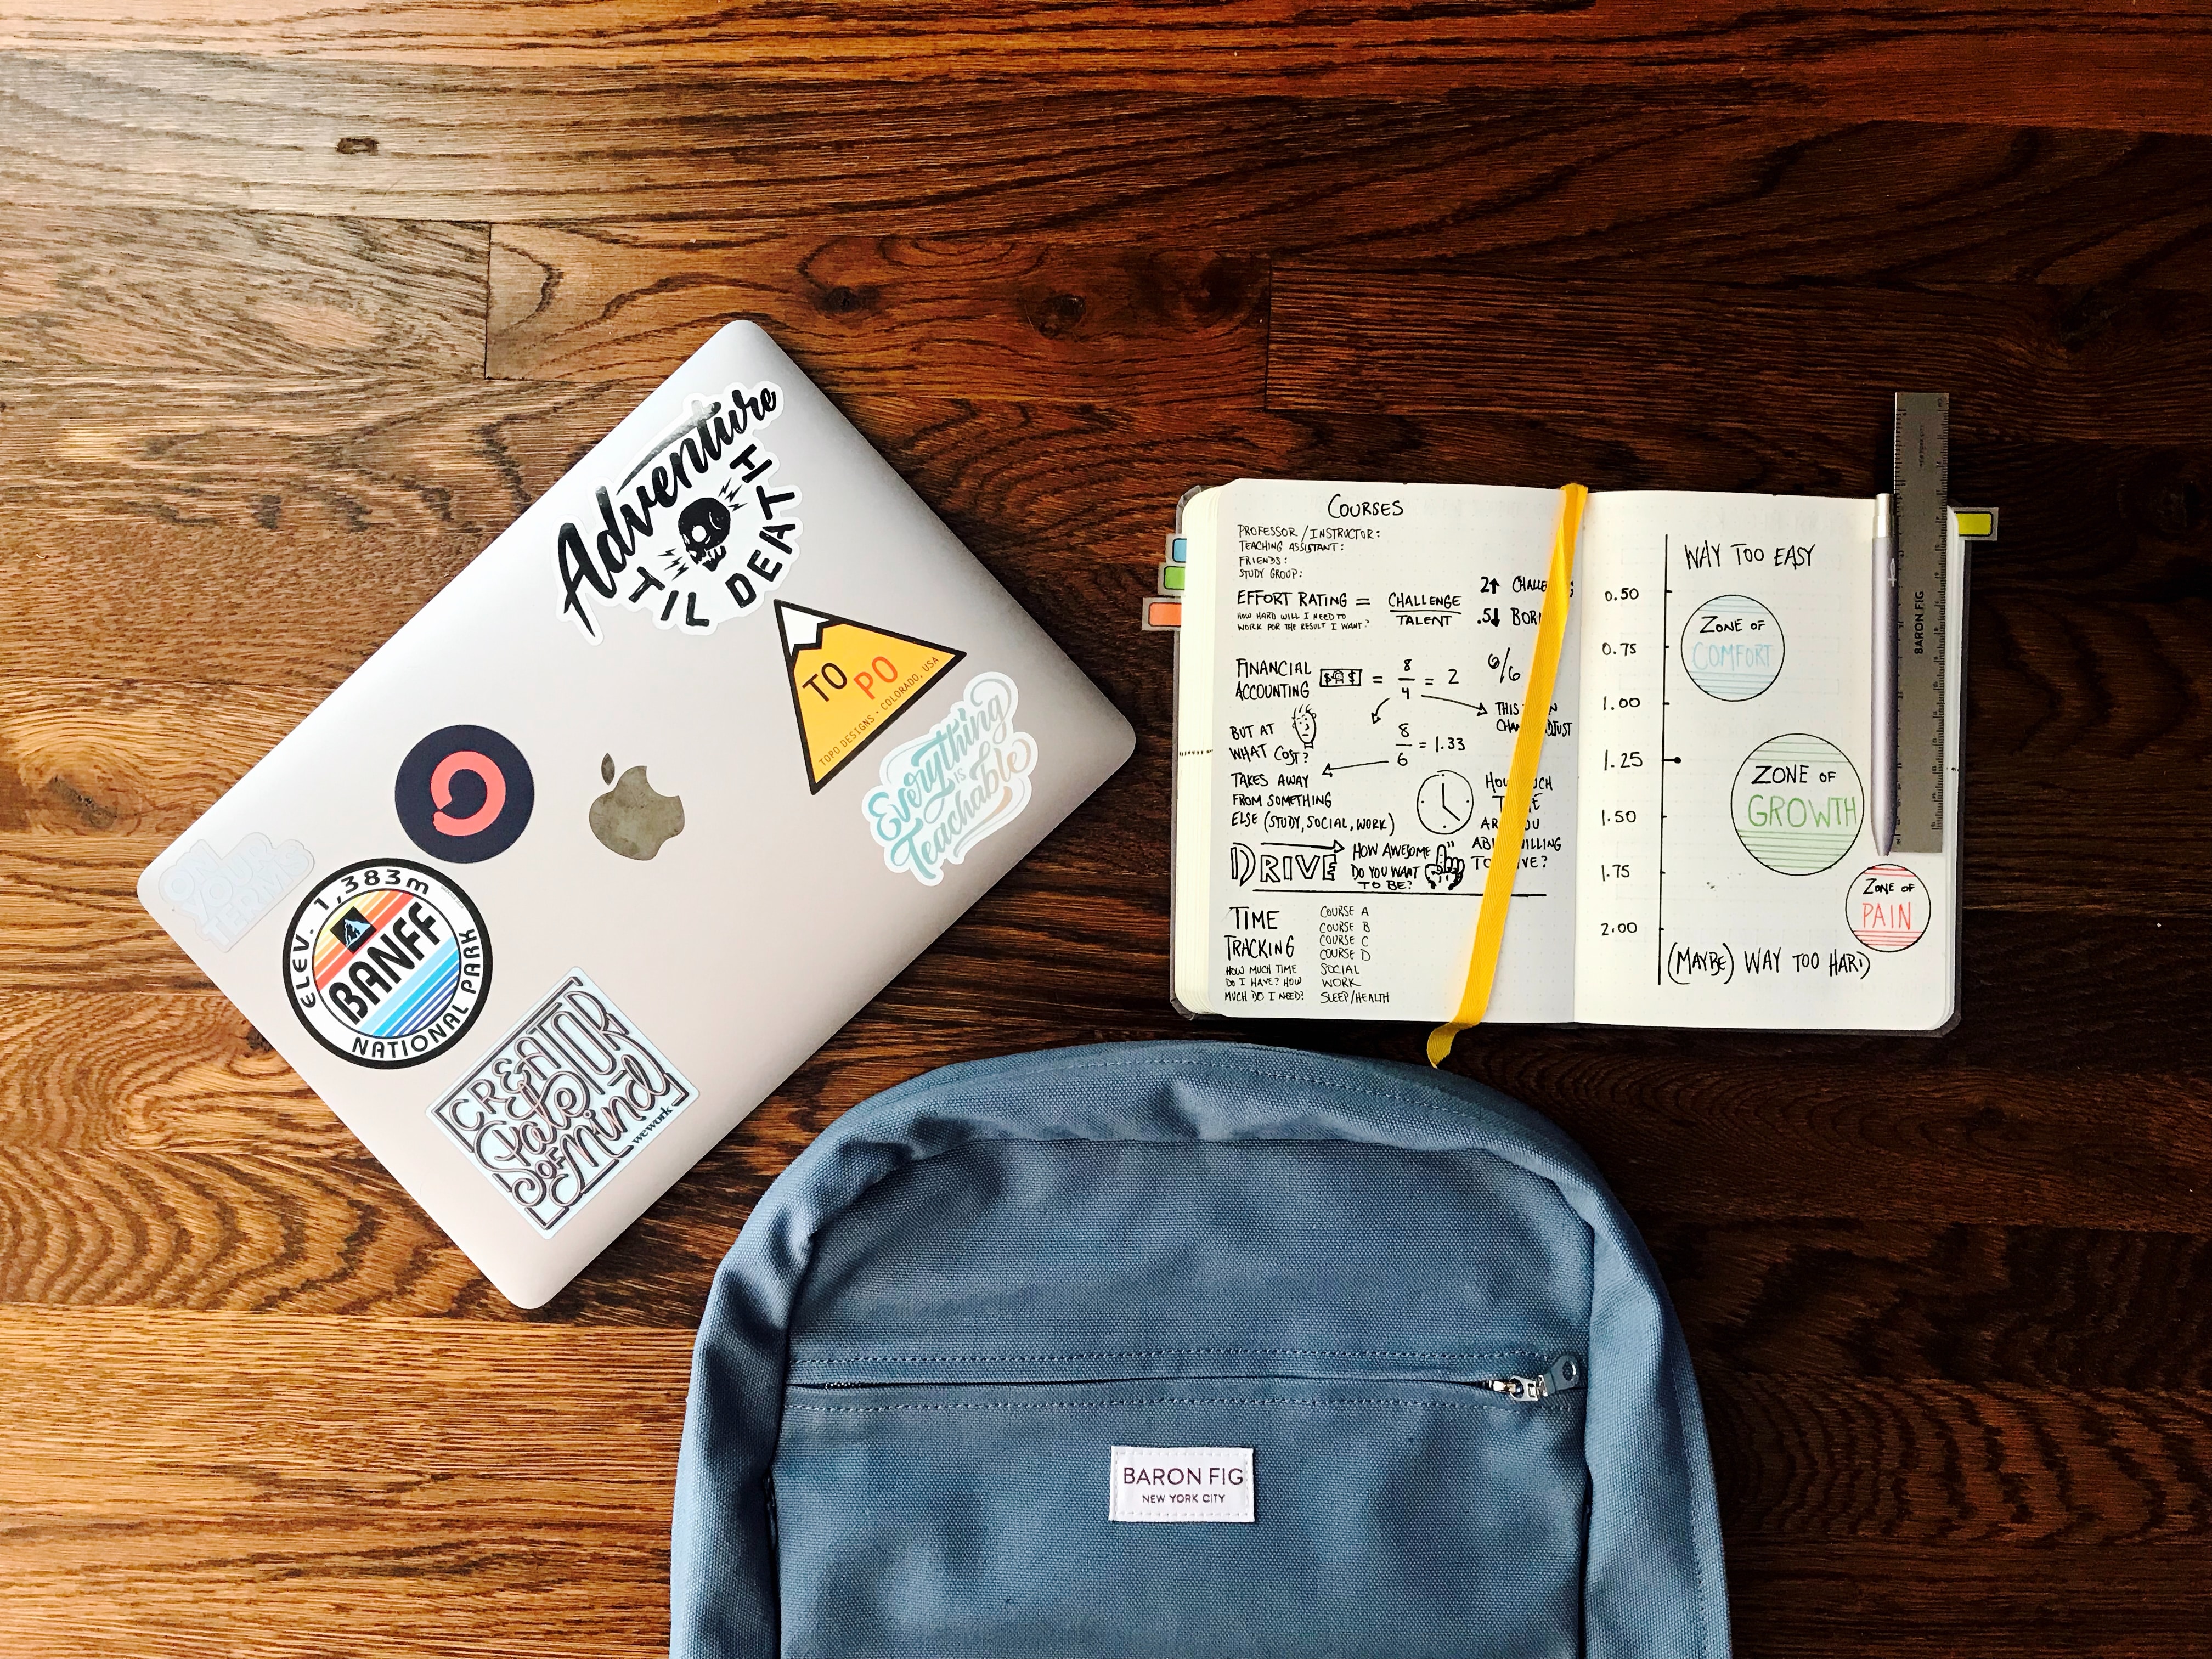 contents of a backpack in a lay flat format including a closed laptop and a notebook with a pencil.